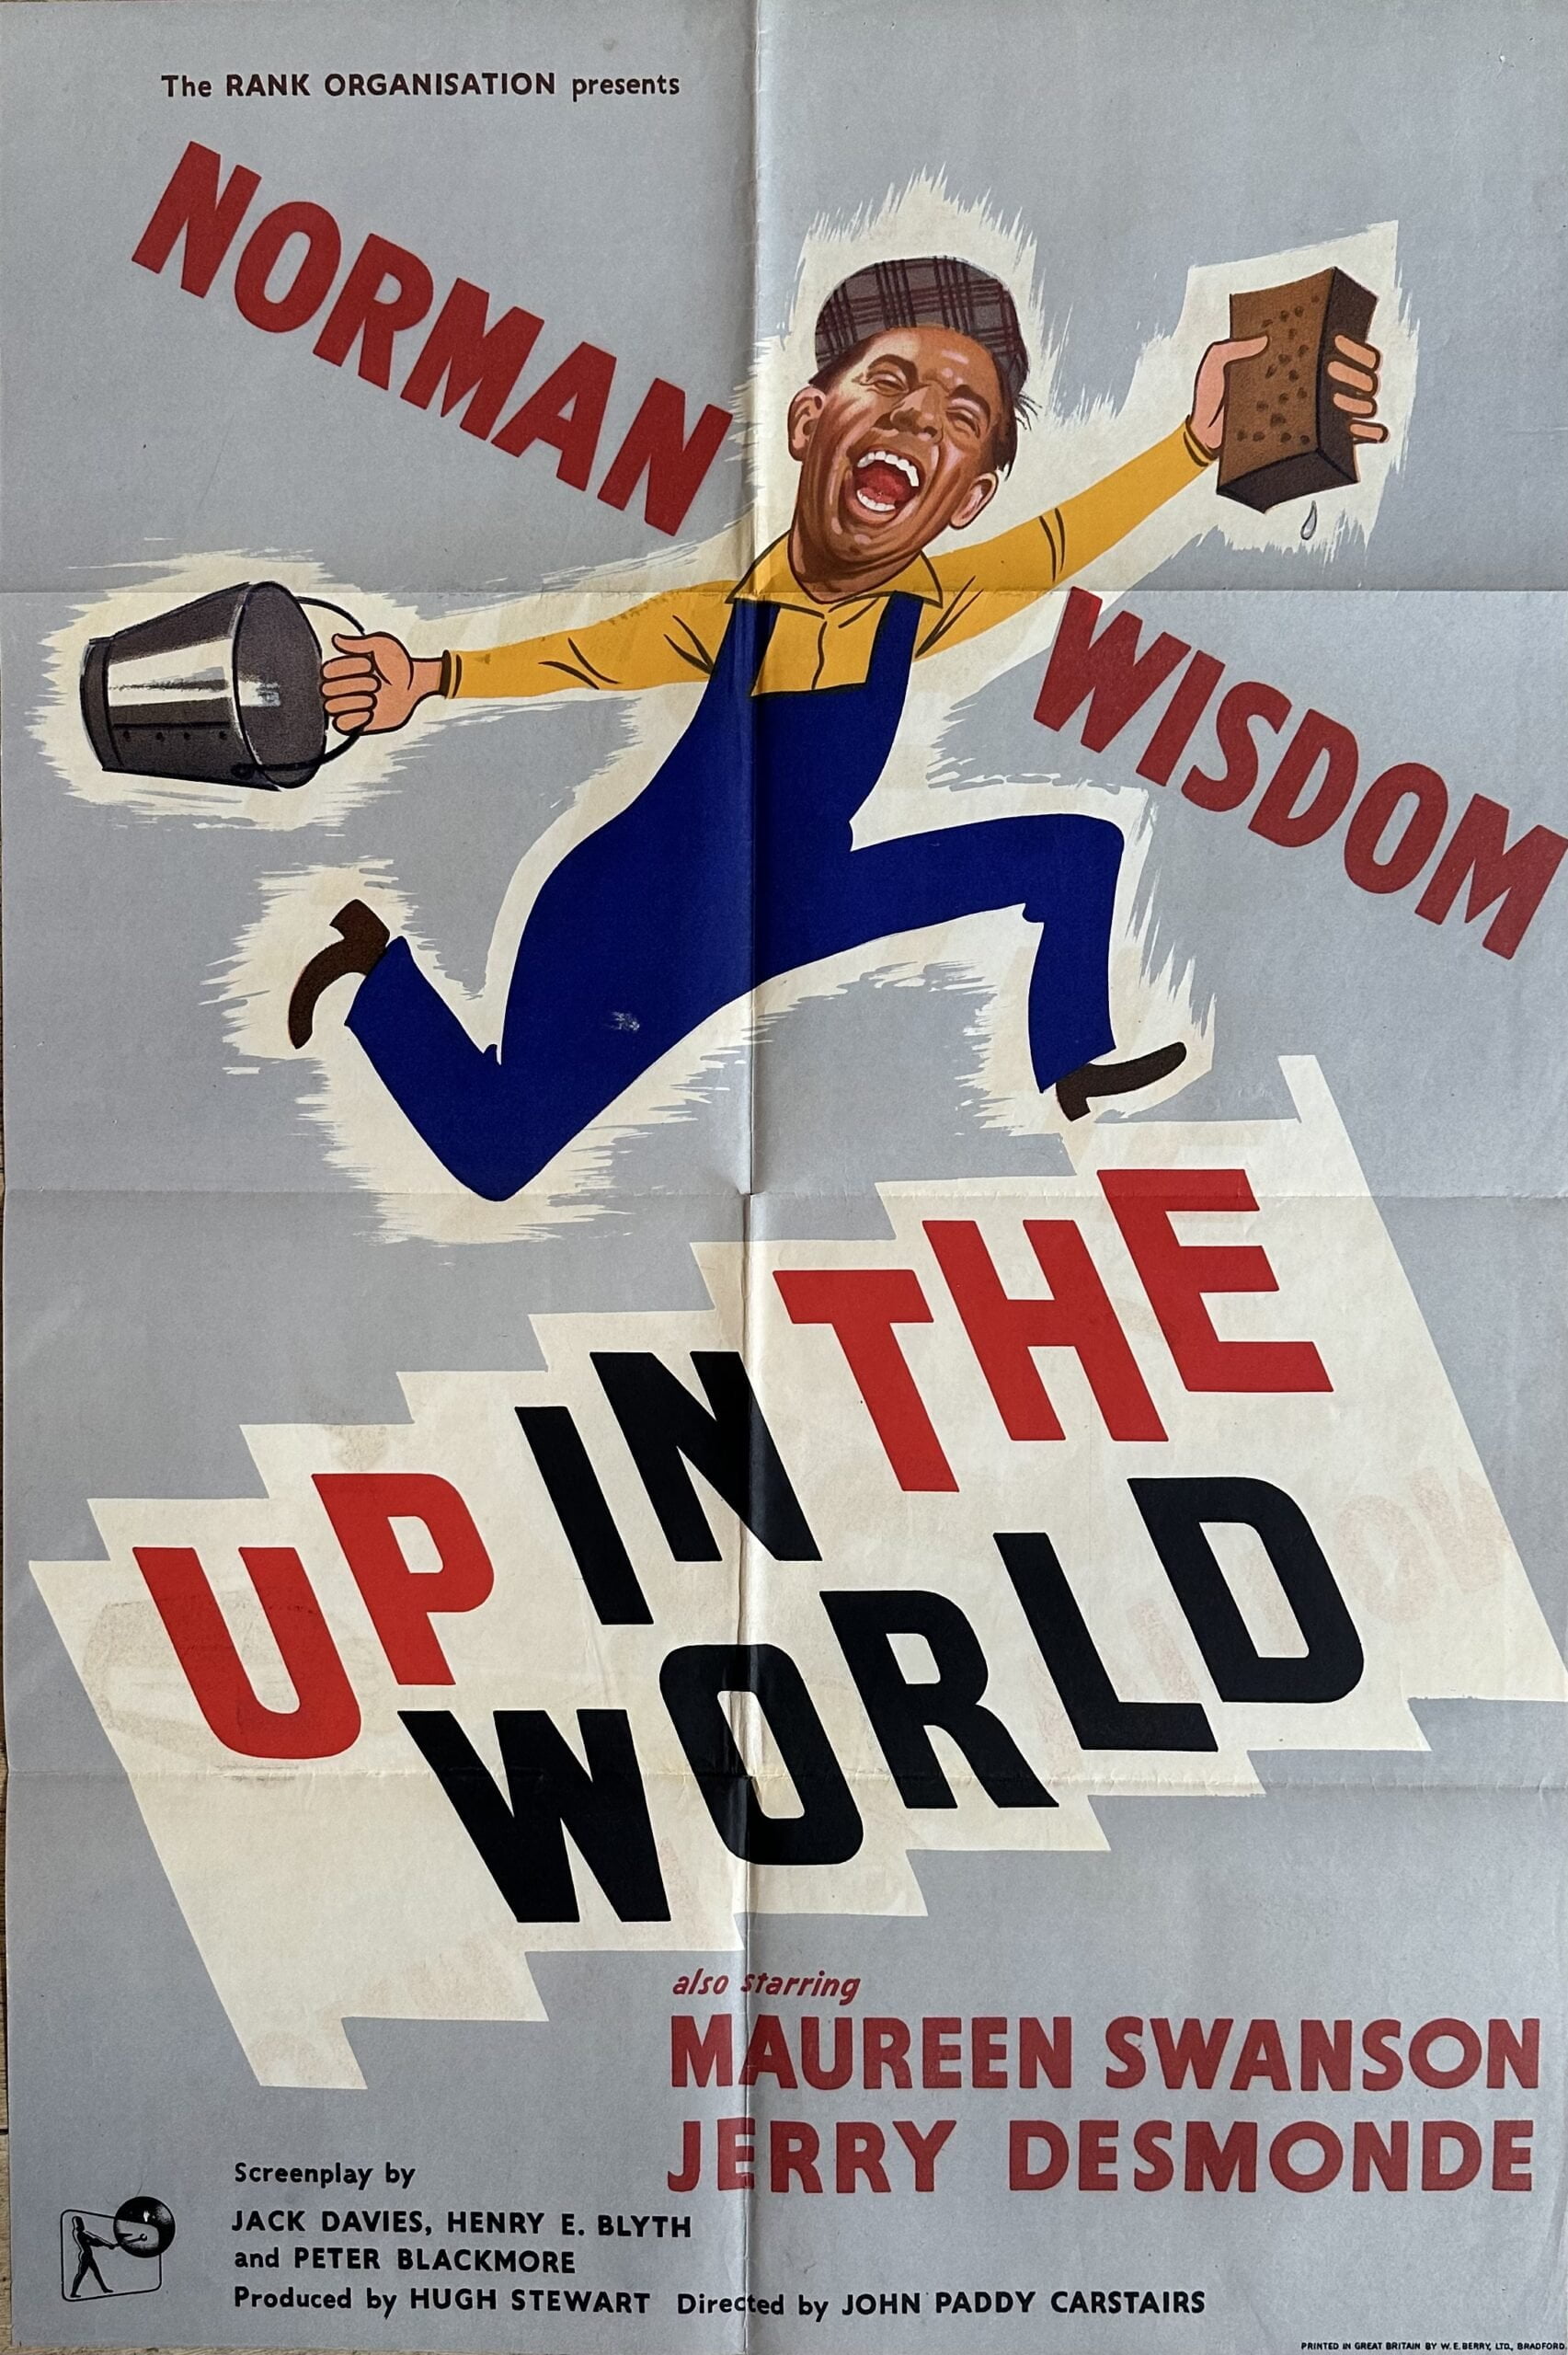 Original vintage cinema advertising movie poster for the comedy, Up in the World